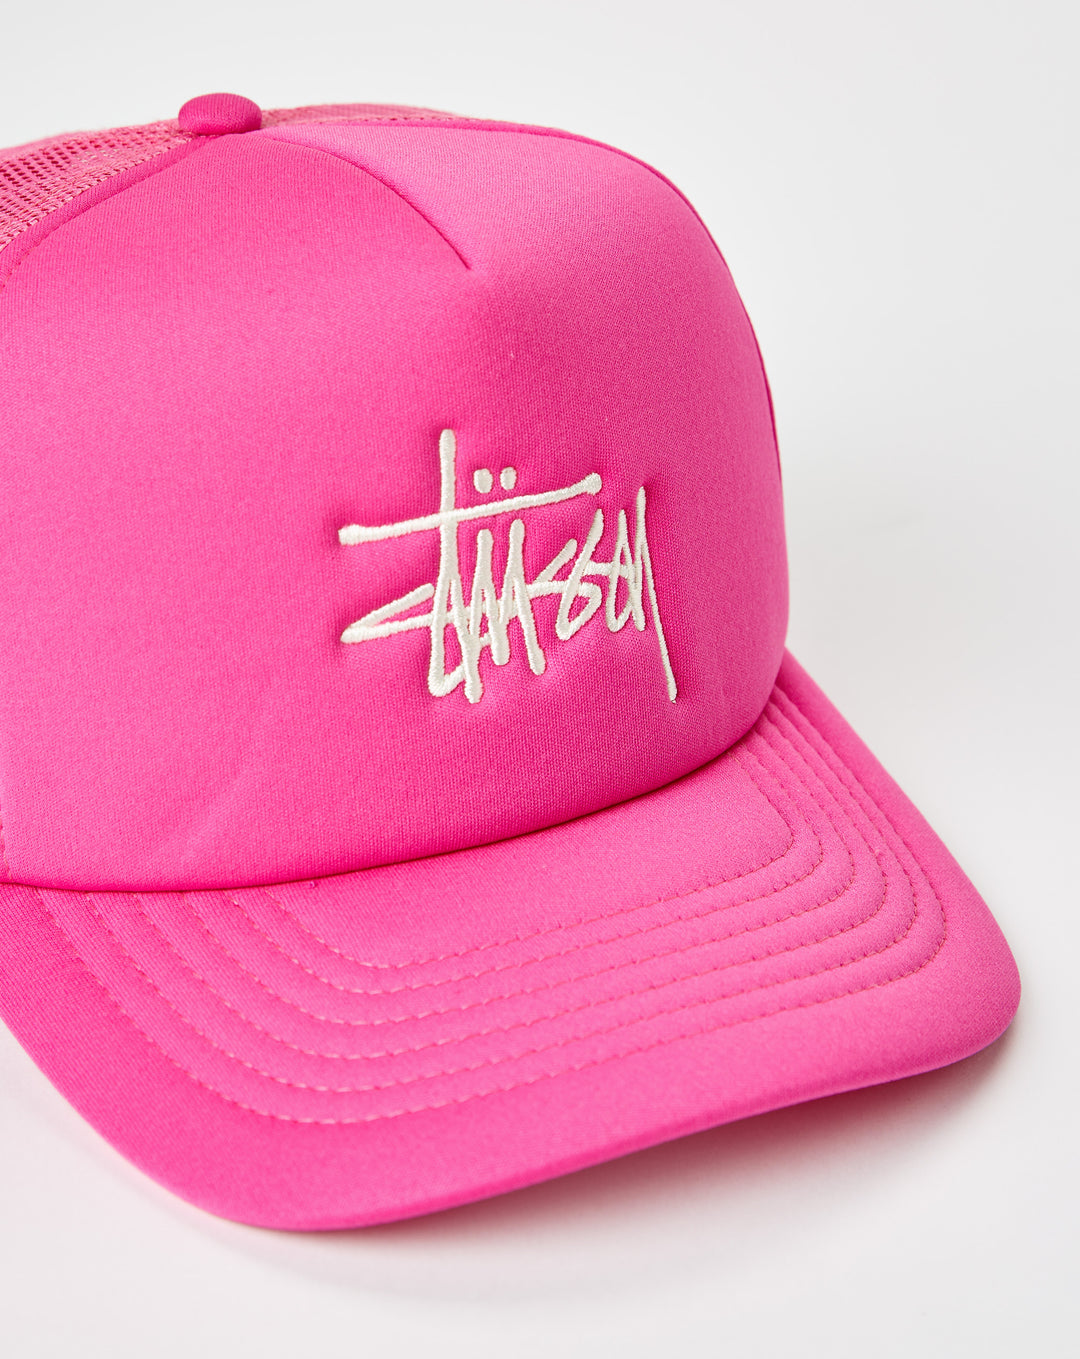 Stüssy s heritage checkered cap ever since we saw  - Cheap Atelier-lumieres Jordan outlet